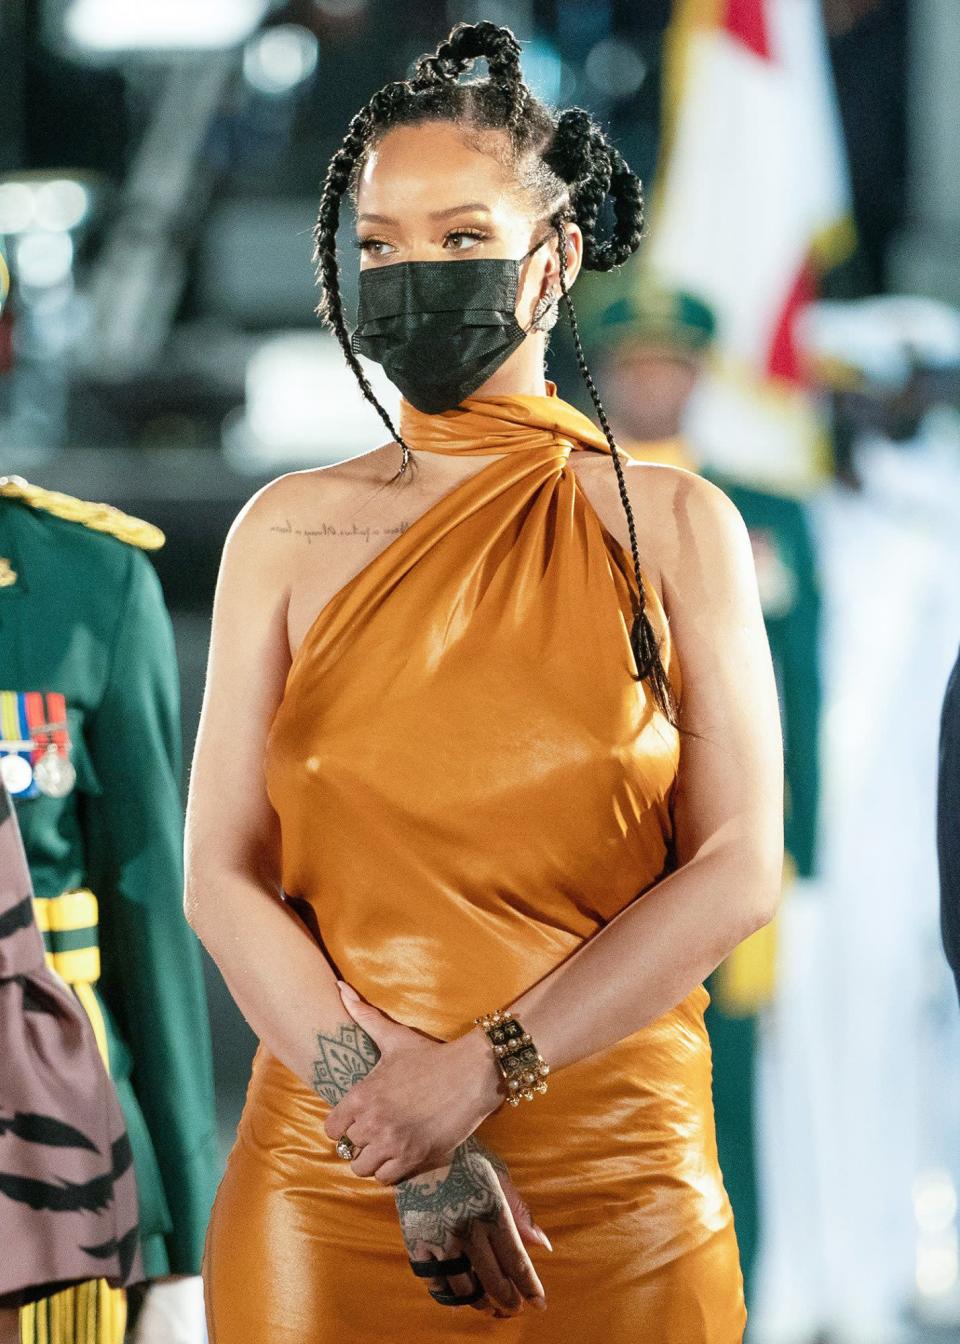 <p>Rihanna stands tall for an important milestone on Nov. 29, looking on as her native Barbados <a href="https://people.com/royals/queen-elizabeth-congratulates-beautiful-country-barbados-on-becoming-a-republic/" rel="nofollow noopener" target="_blank" data-ylk="slk:transitions to an independent republic" class="link rapid-noclick-resp">transitions to an independent republic</a> led by new president, Sandra Mason. Prince Charles was also on hand for the ceremony, where <a href="https://people.com/music/rihanna-named-national-hero-by-barbados-prime-minister/" rel="nofollow noopener" target="_blank" data-ylk="slk:Rihanna was honored" class="link rapid-noclick-resp">Rihanna was honored</a> as a National Hero by Barbados Prime Minister Mia Mottley.</p>